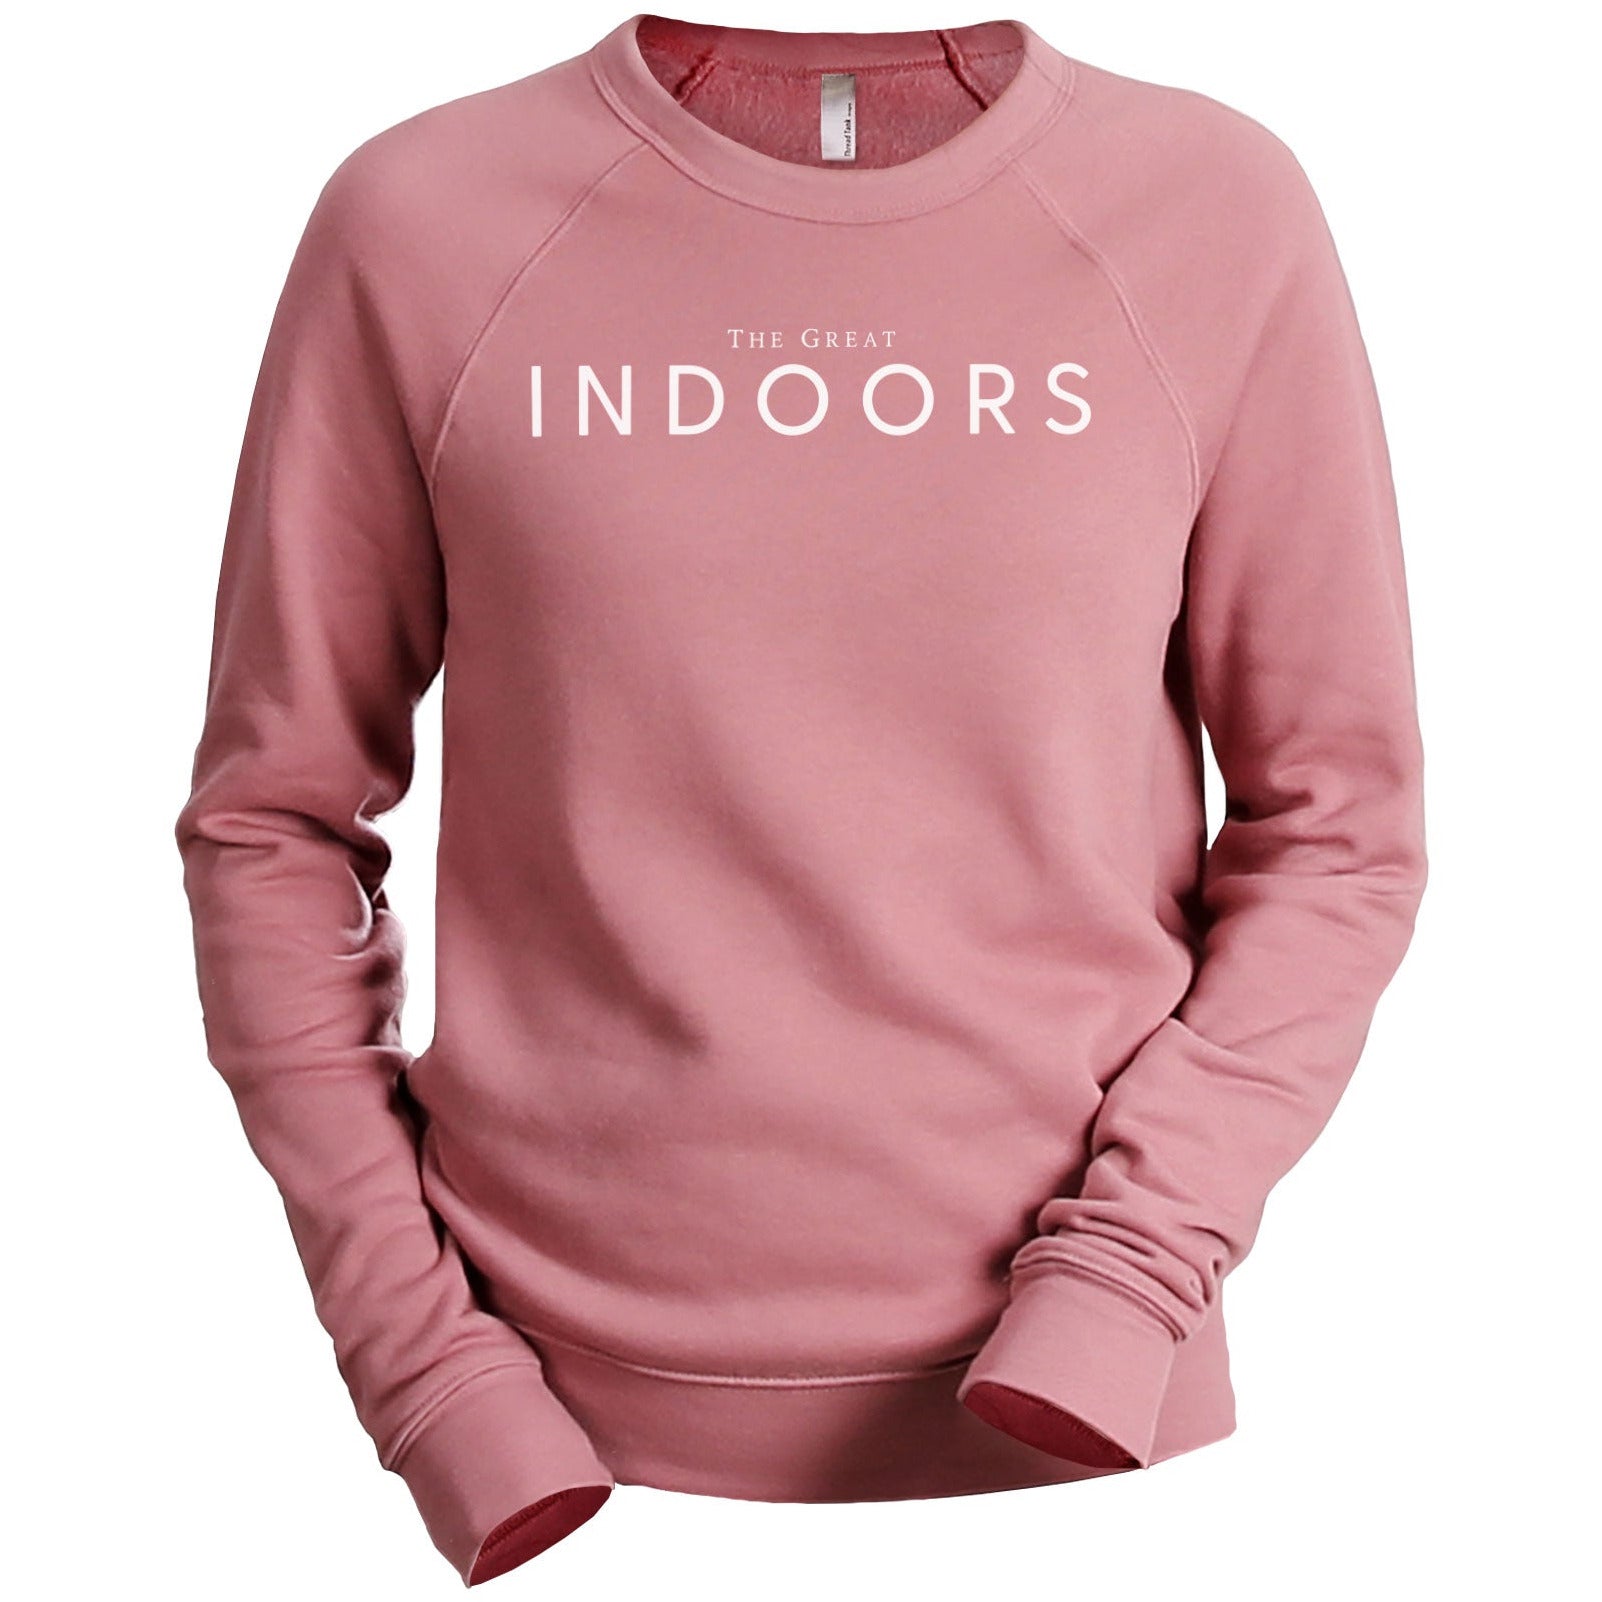 The Great Indoors - Stories You Can Wear